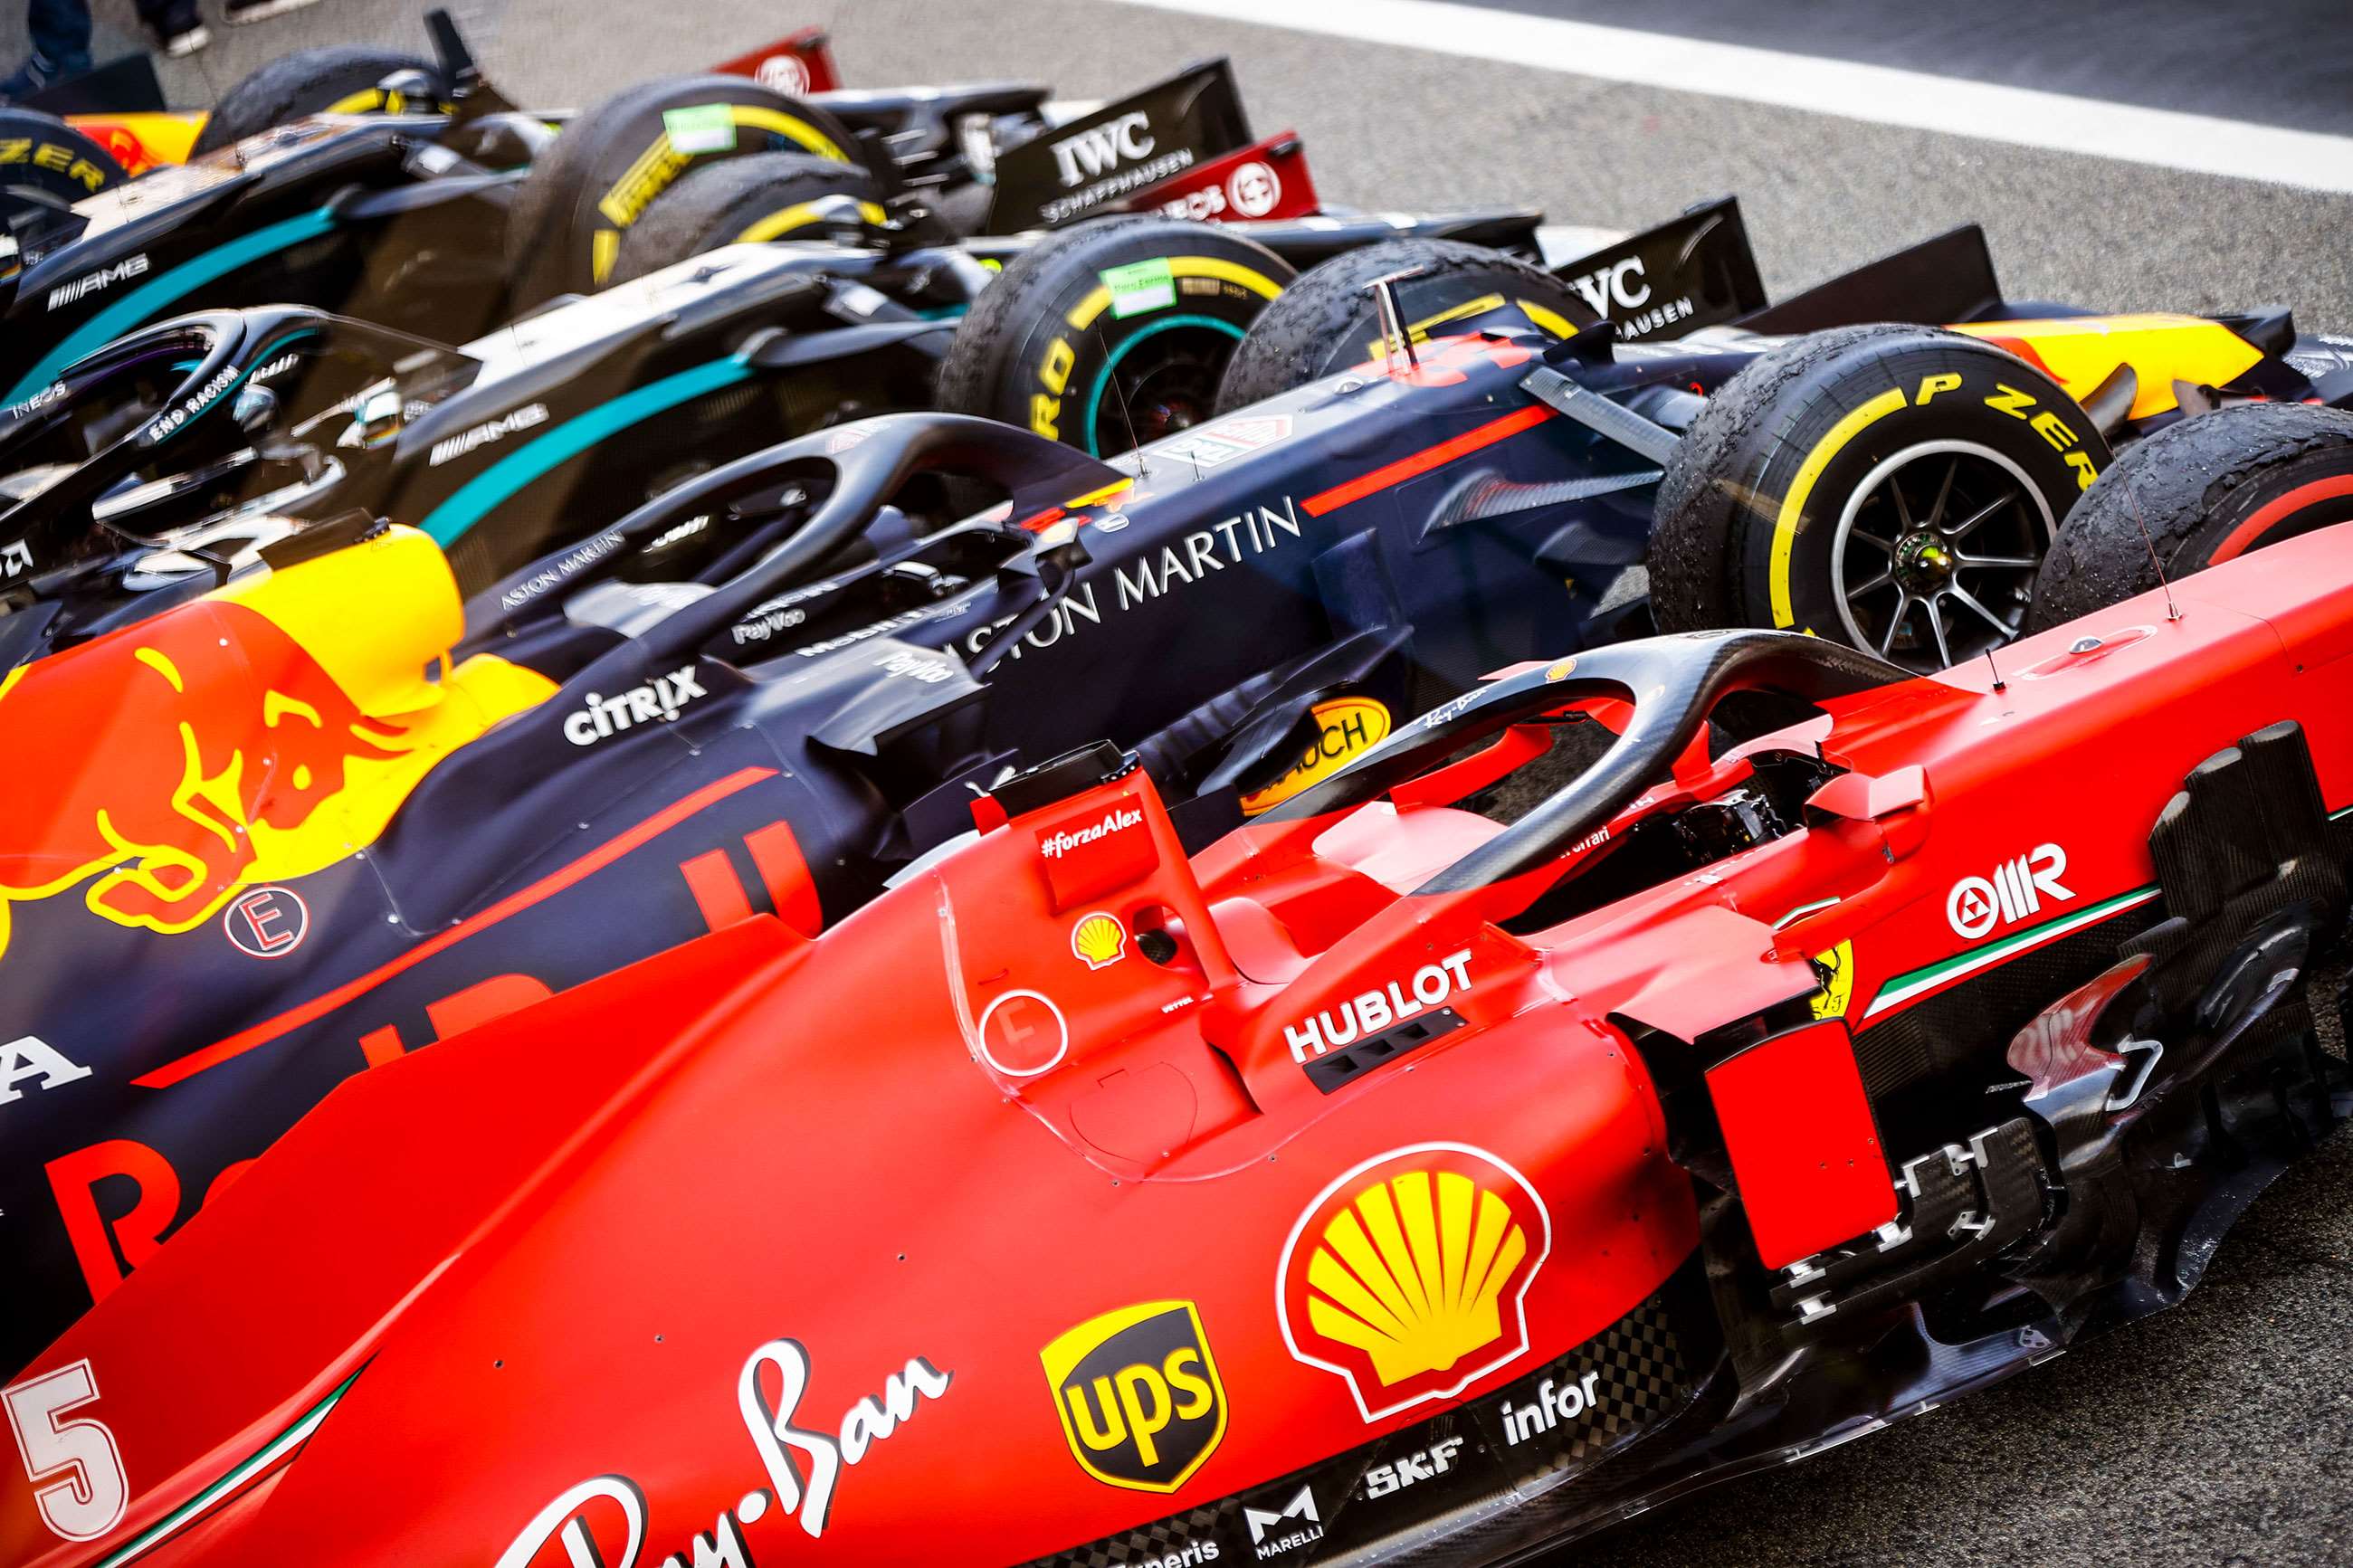 Every F1 team agrees to stay until 2025 GRR